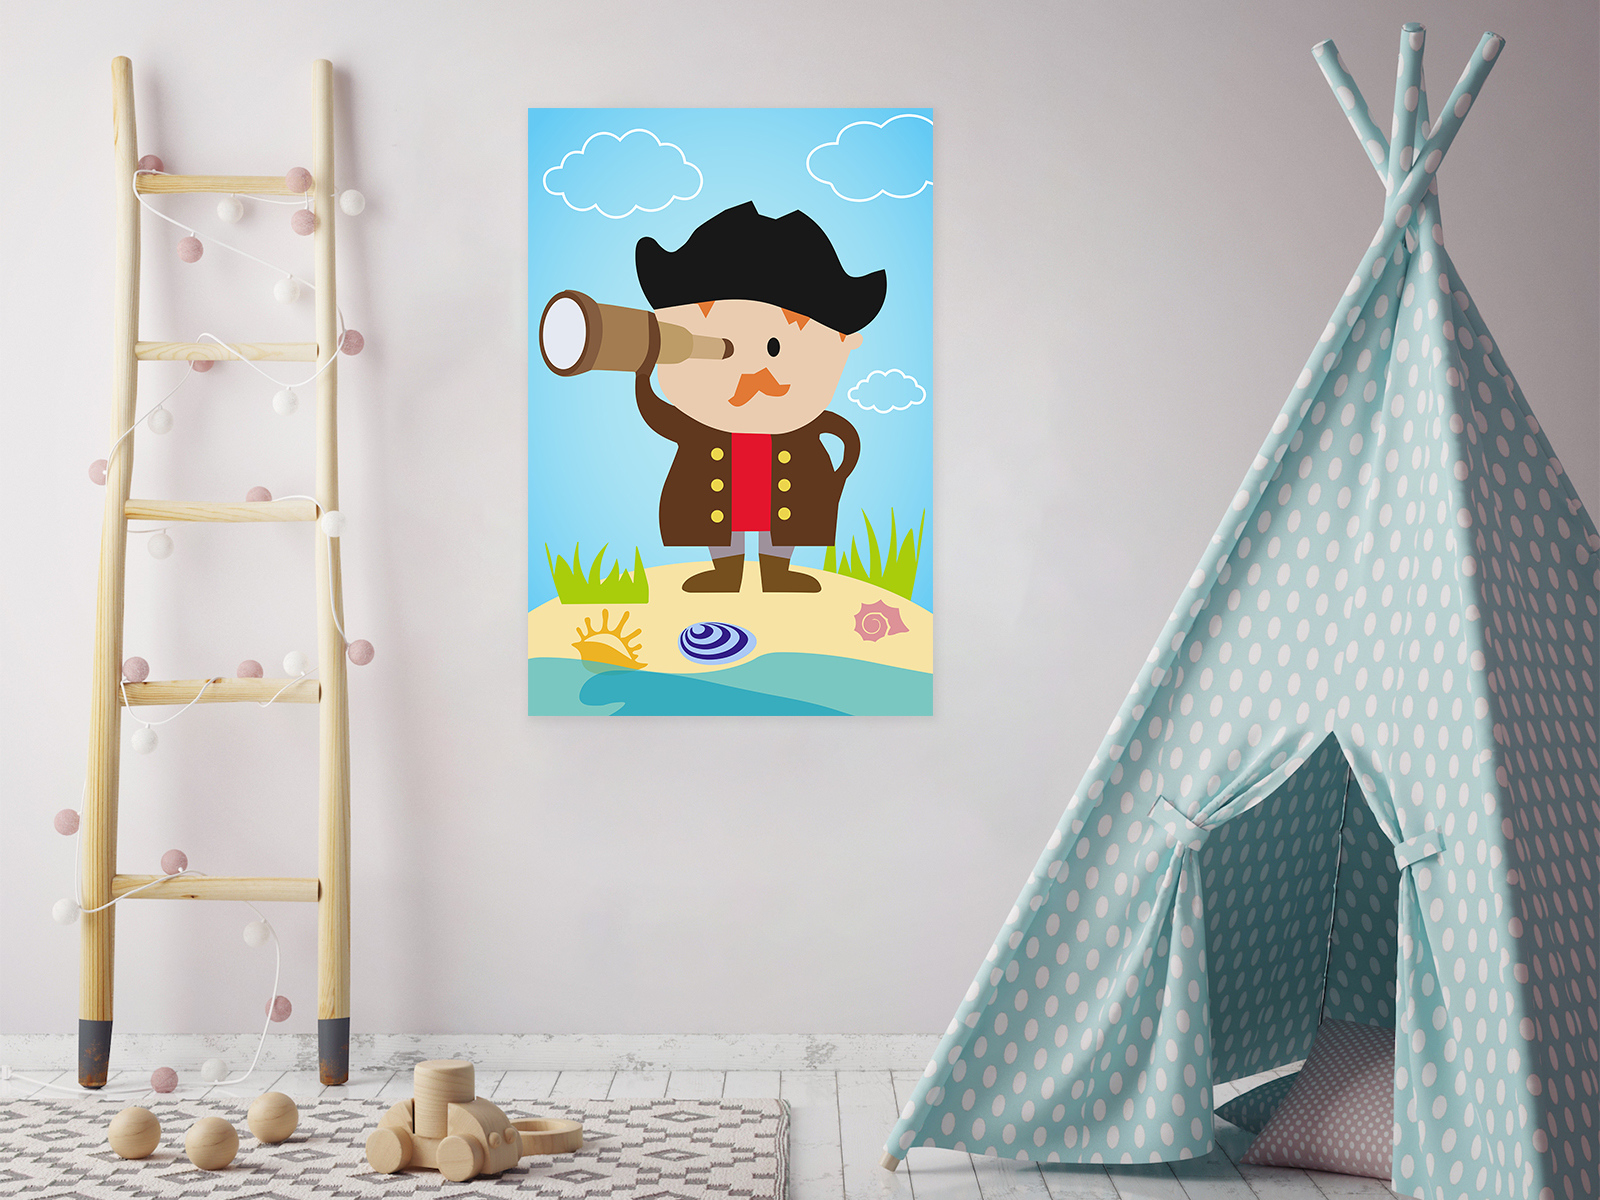 Awkward Styles Marine Picture Kids Play Room Wall Art Funny Pirates Art Newborn Baby Room Wall Decor Pirates Wallpapers Made in USA Little Pirate Picture Pirate Poster Print Kids Room Wall Art - image 2 of 3